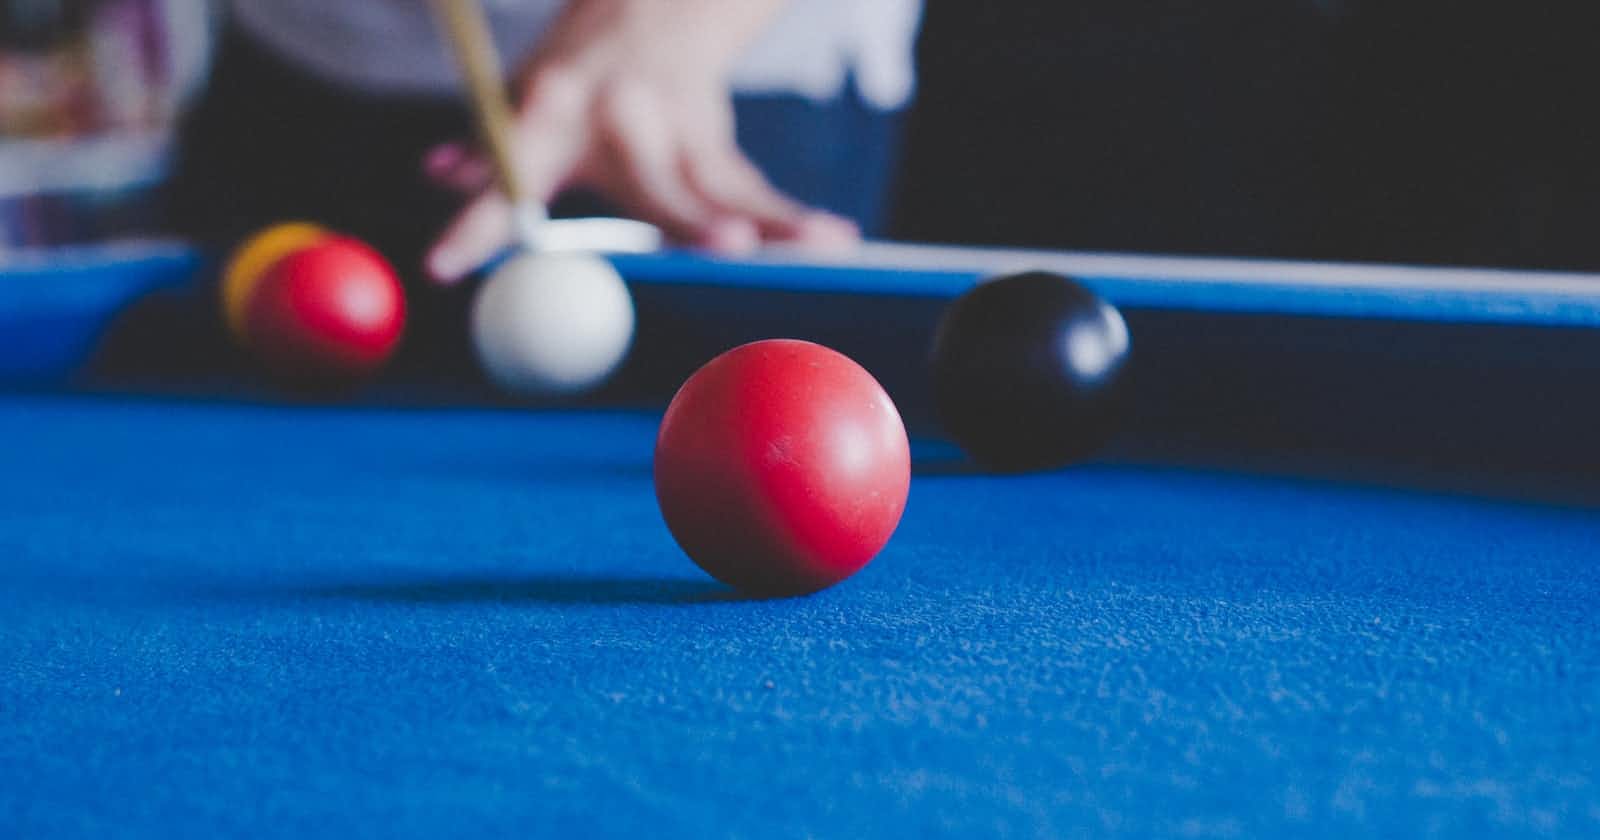 WHAT IS SNOOKER  AND HOW TO BE GOOD AT IT?